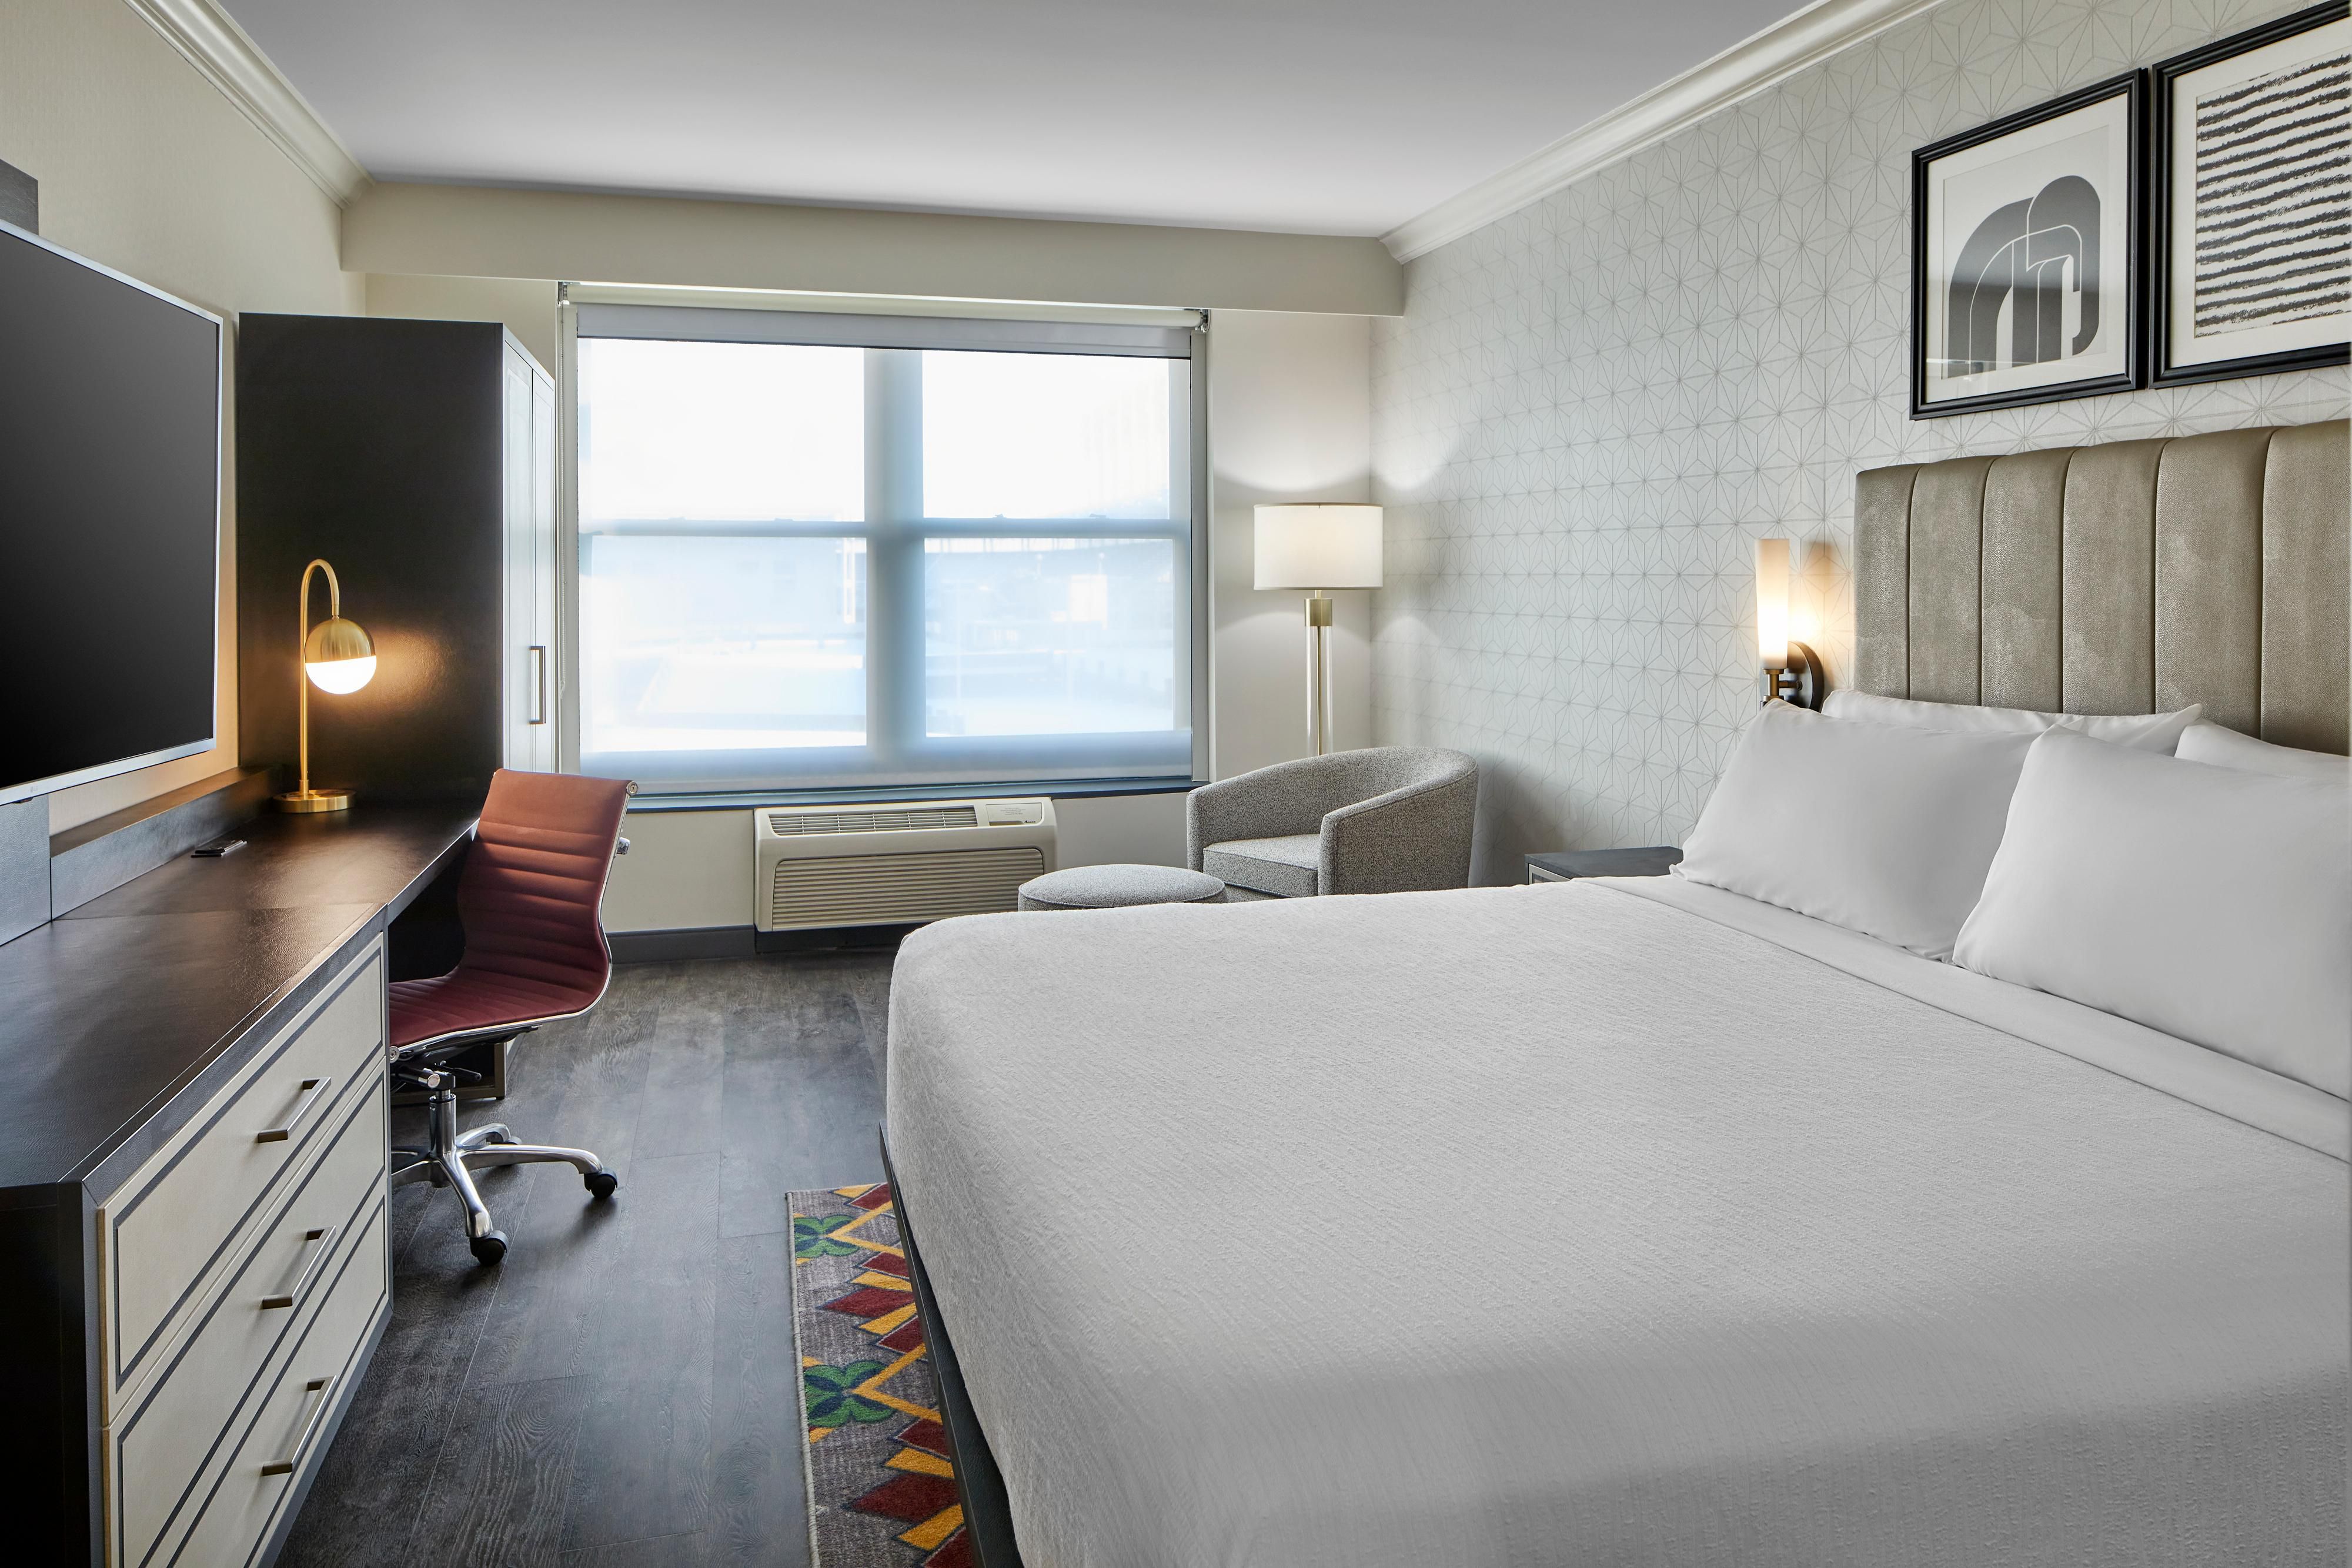 Our guest rooms and suites are newly renovated as to bring an exciting new experience to Downtown Cleveland.